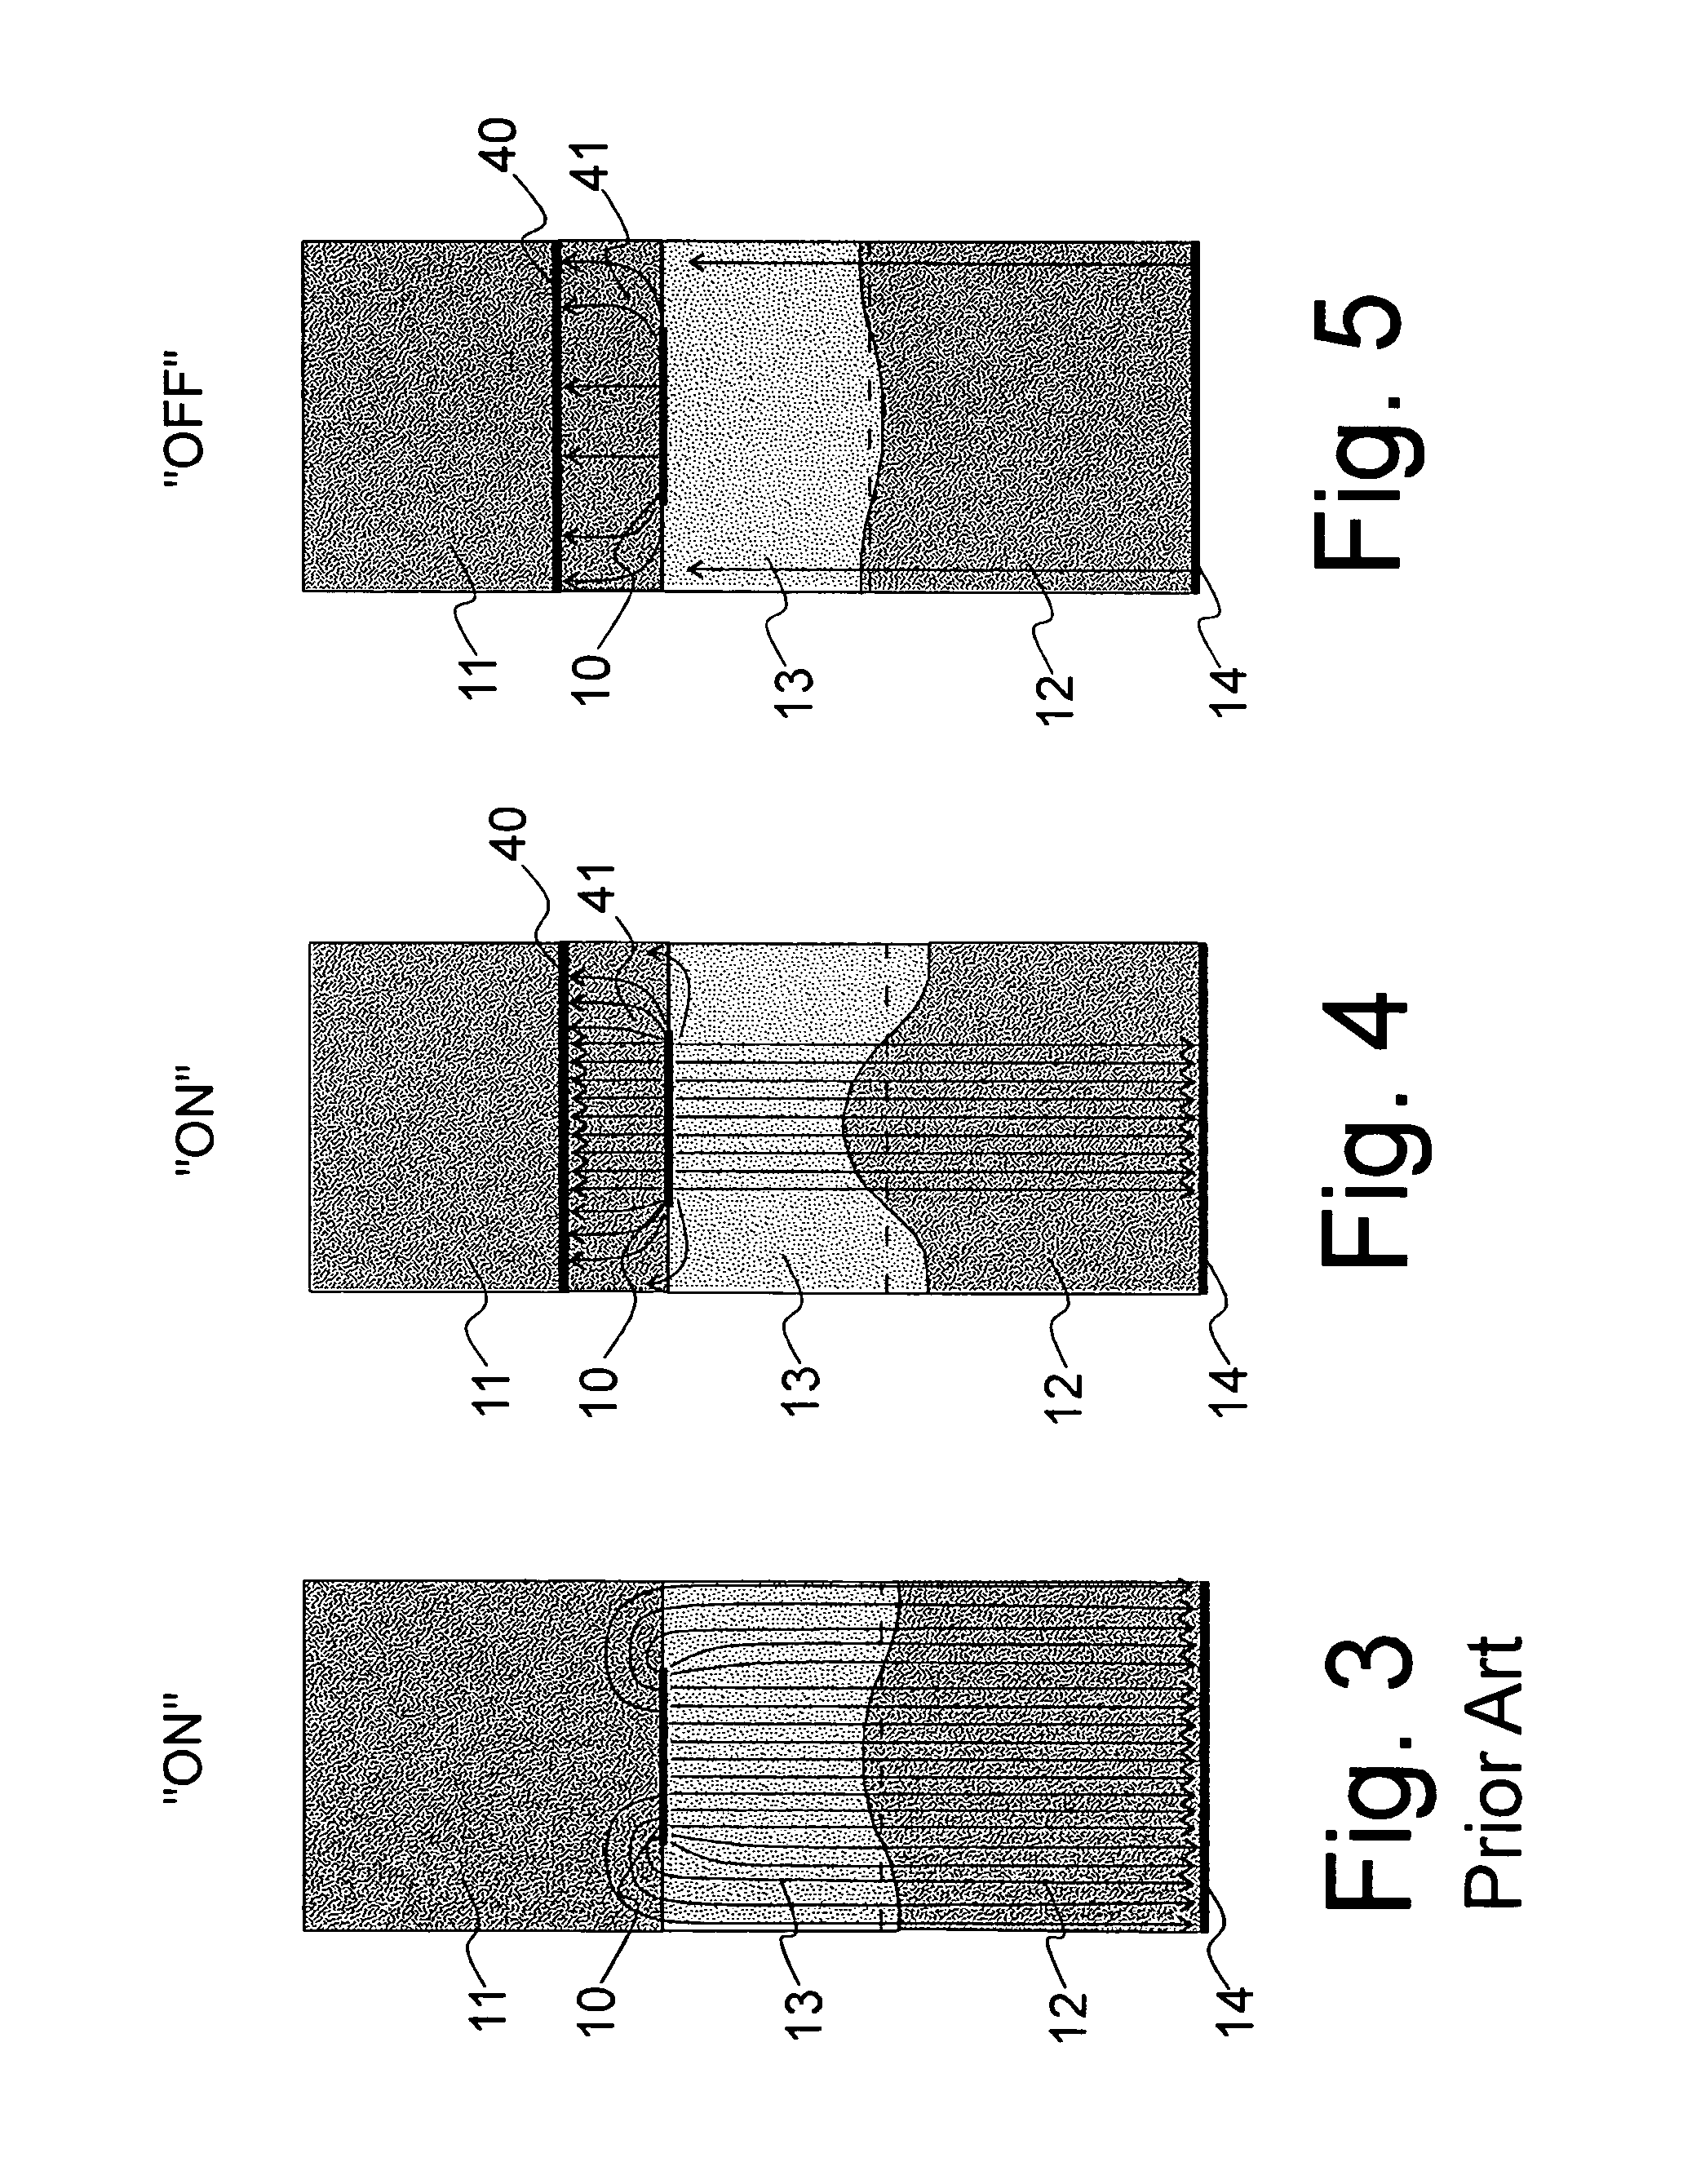 Enhancement electrode configuration for electrically controlled light modulators